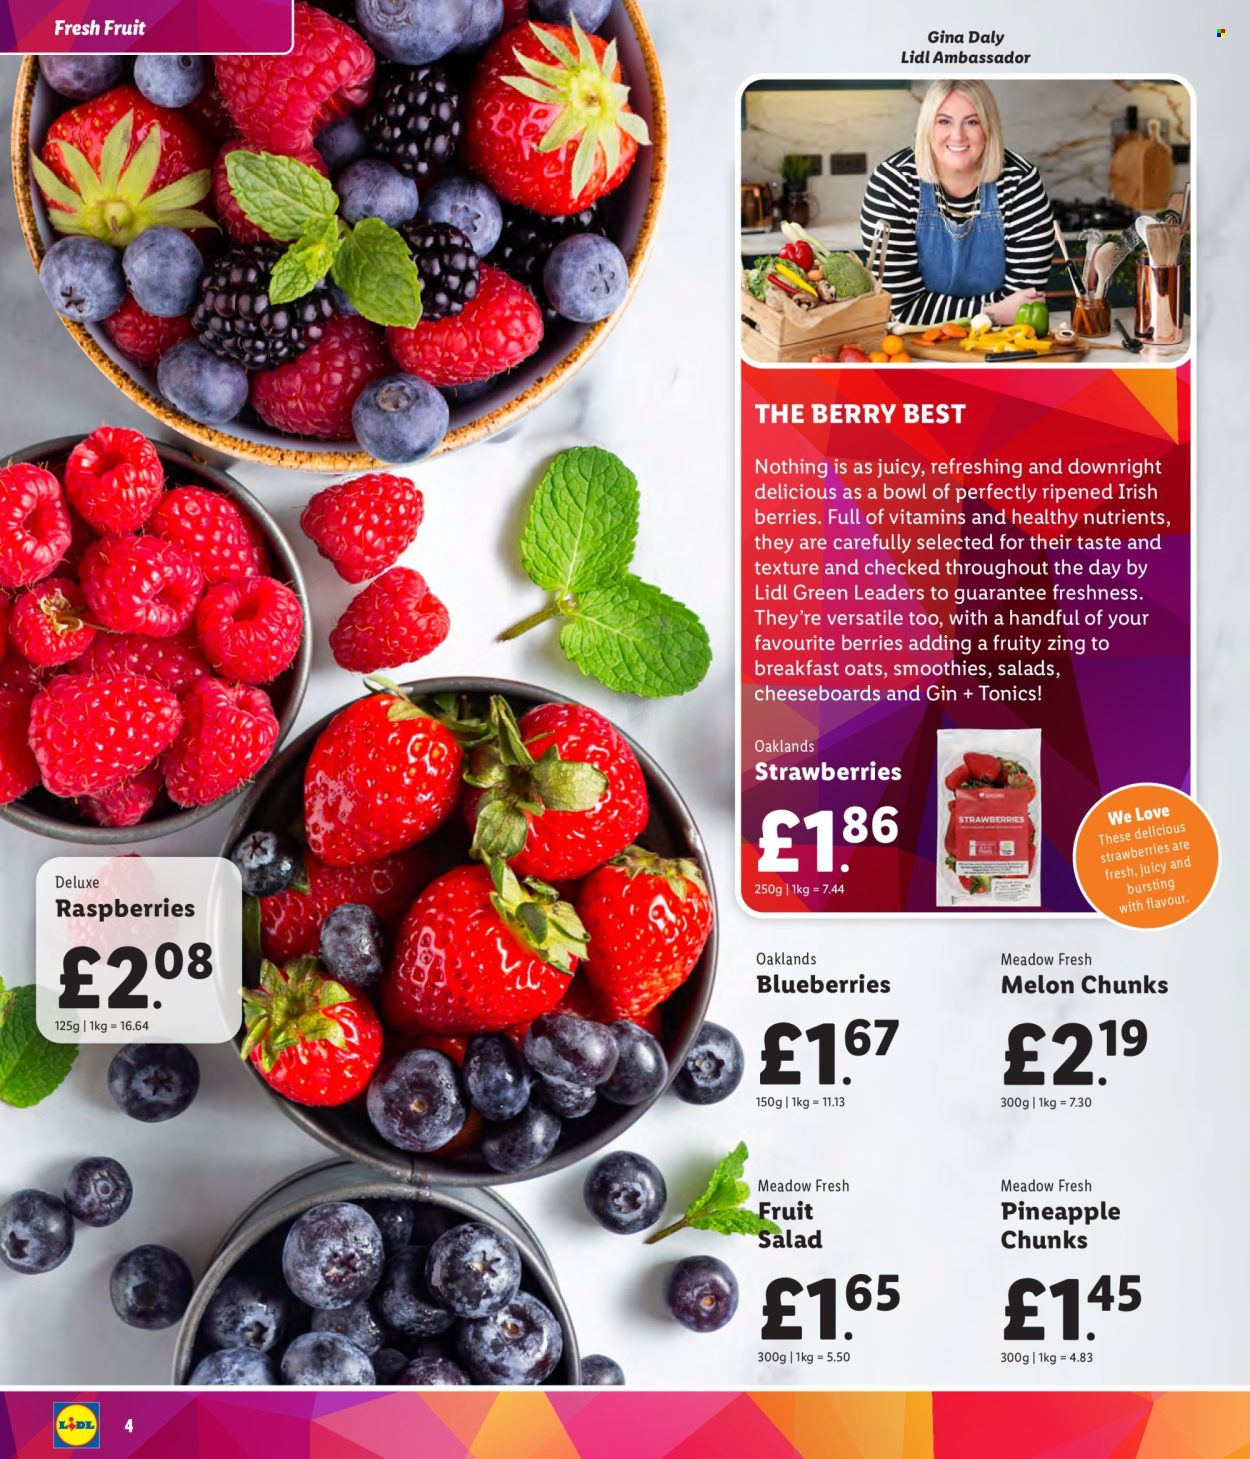 thumbnail - Lidl offer  - Sales products - alcohol, salad, blueberries, raspberries, melons, diced fruit, oats, fruit salad, smoothie, gin, dietary supplement, vitamins. Page 4.